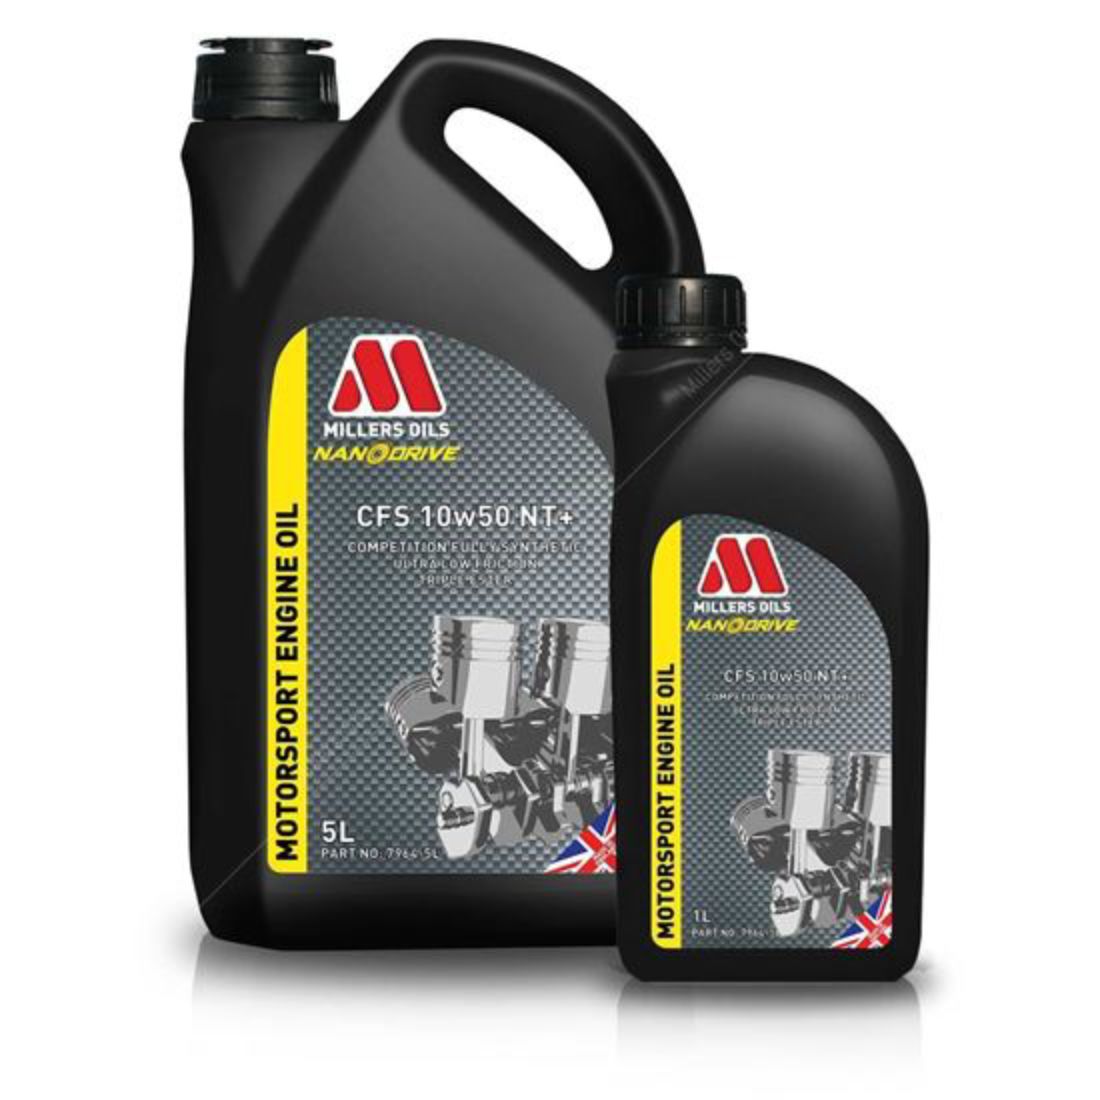 Millers Oils Nanodrive CFS 10w50 NT+ Fully Synthetic Performance Engine Oil